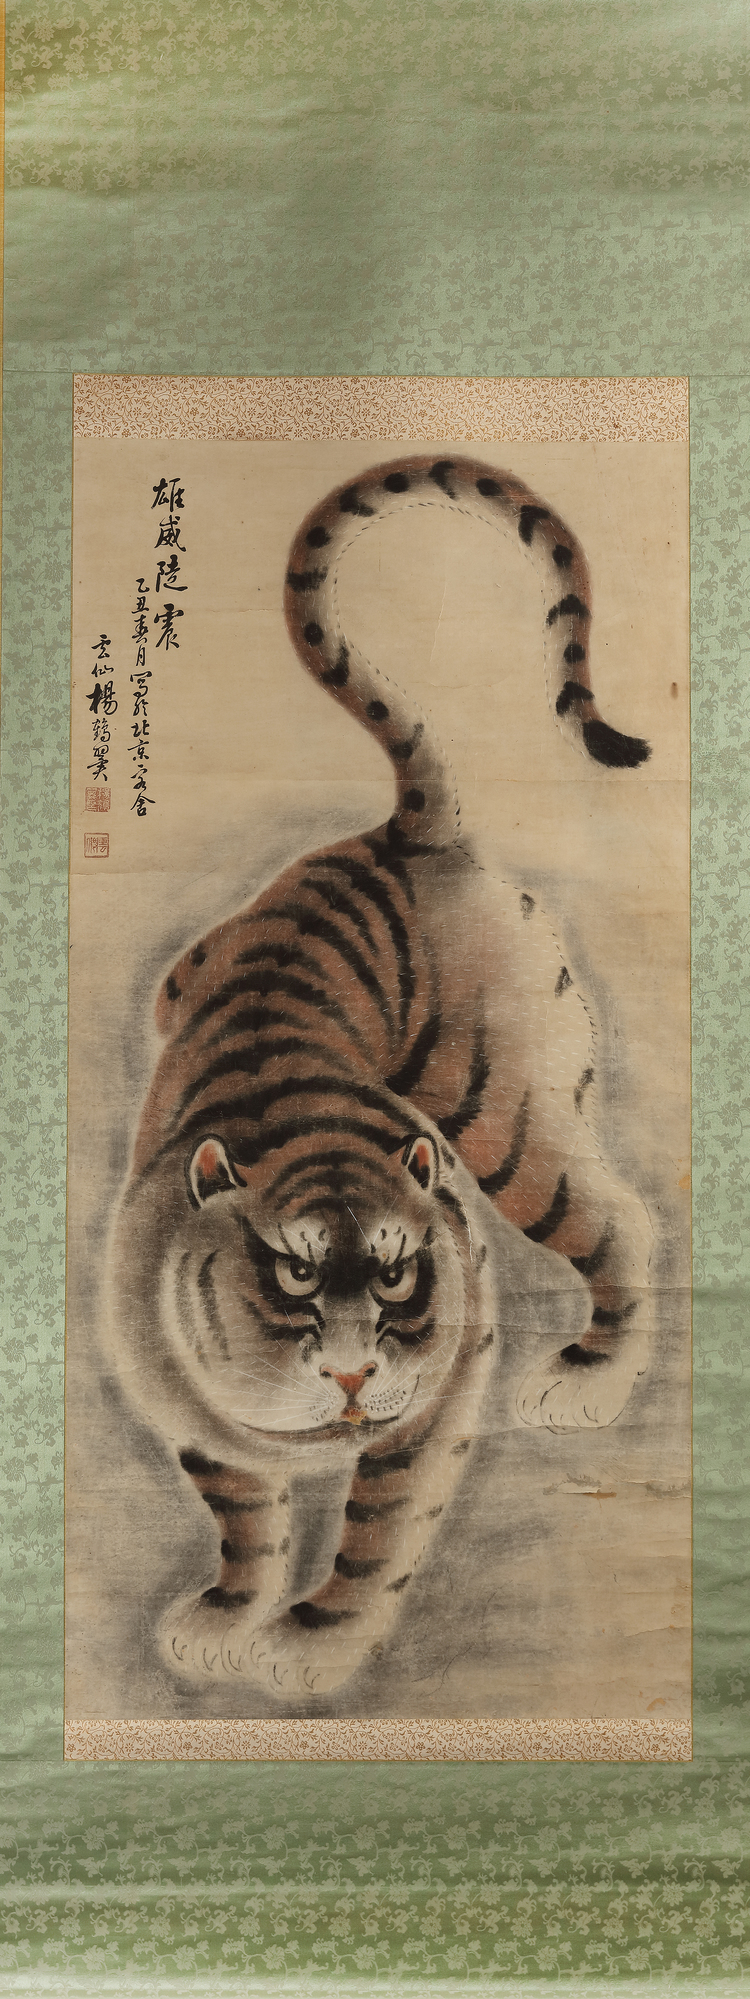 A CHINESE HANGING SCROLL WITH A POLYCHROME PAINTING OF A TIGER